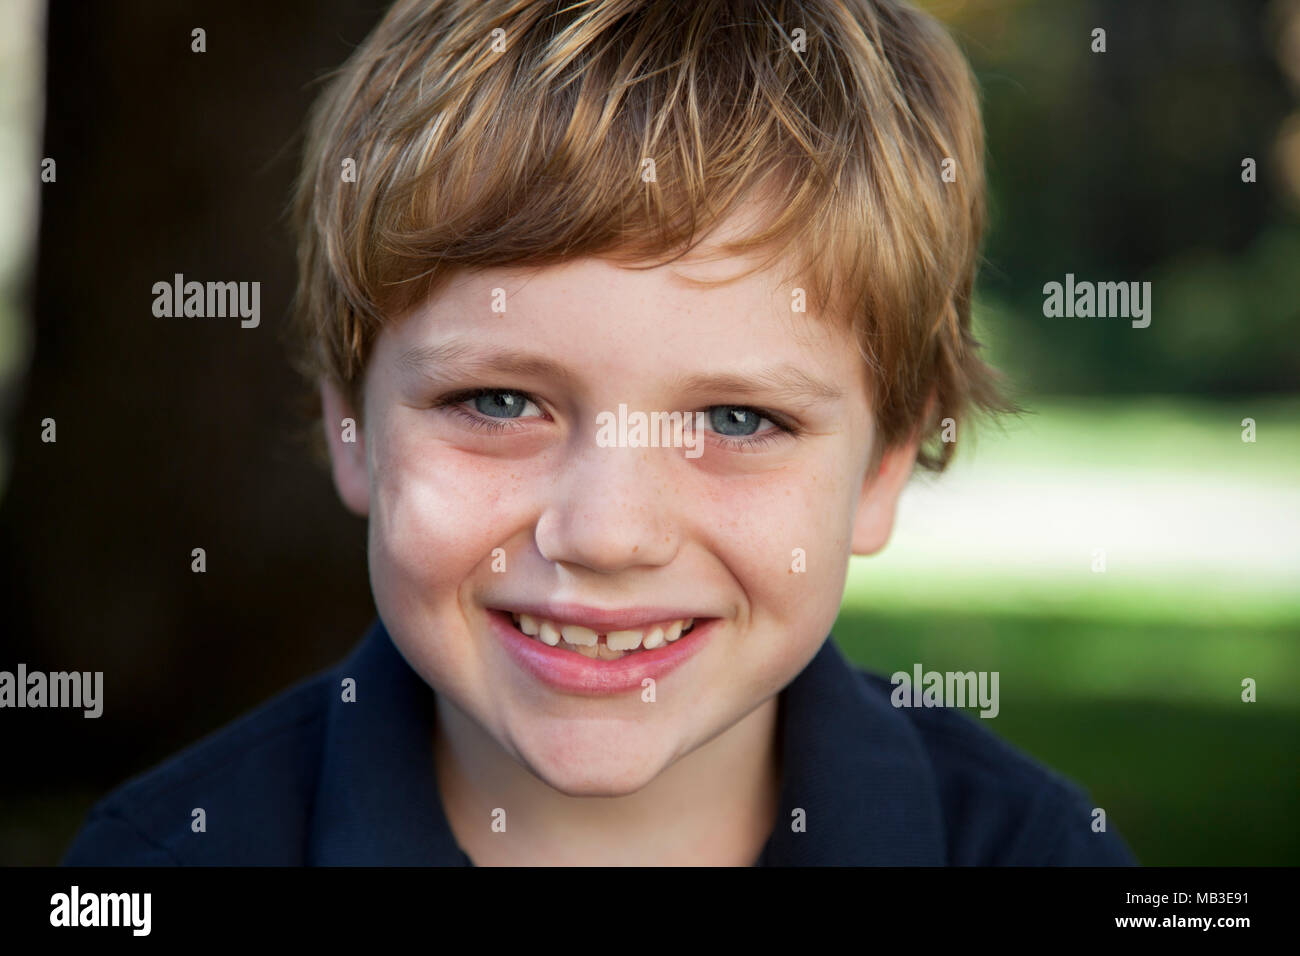 Blonde Boy with Glasses Smiling - wide 9